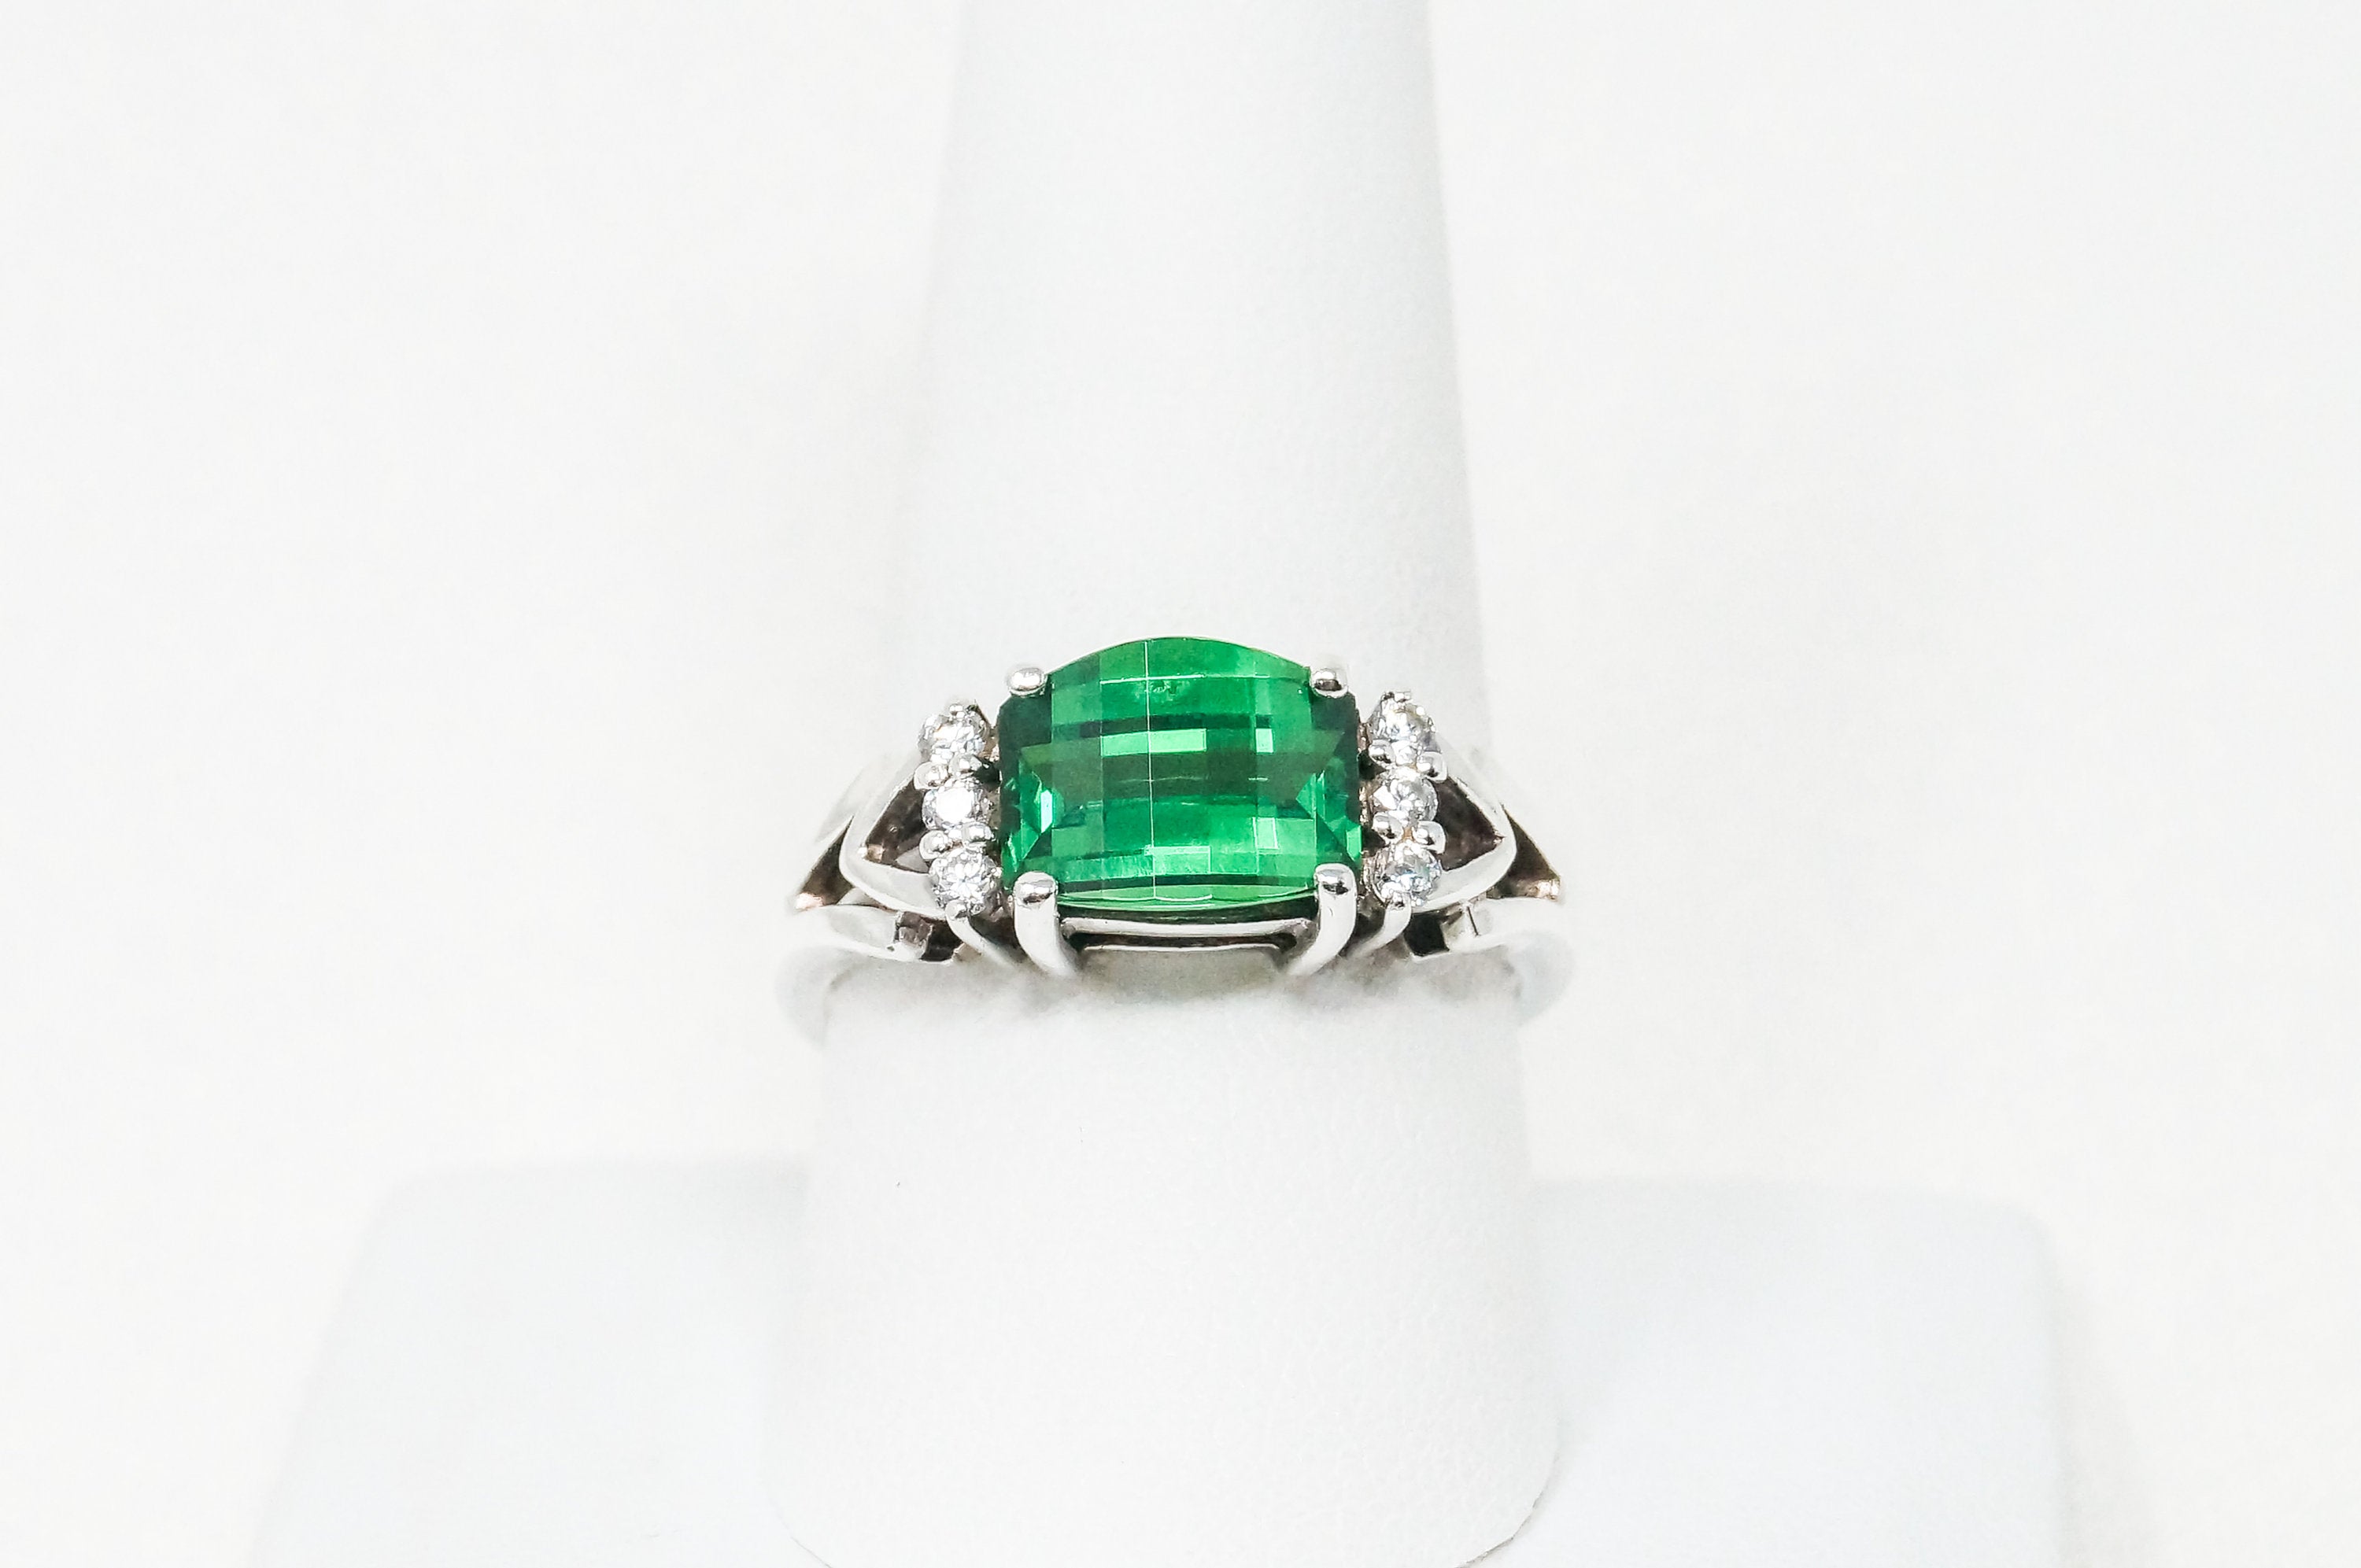 Vintage Simulated Green Emerald Cz Accented Art Deco Sterling Silver Ring Sz 9.5